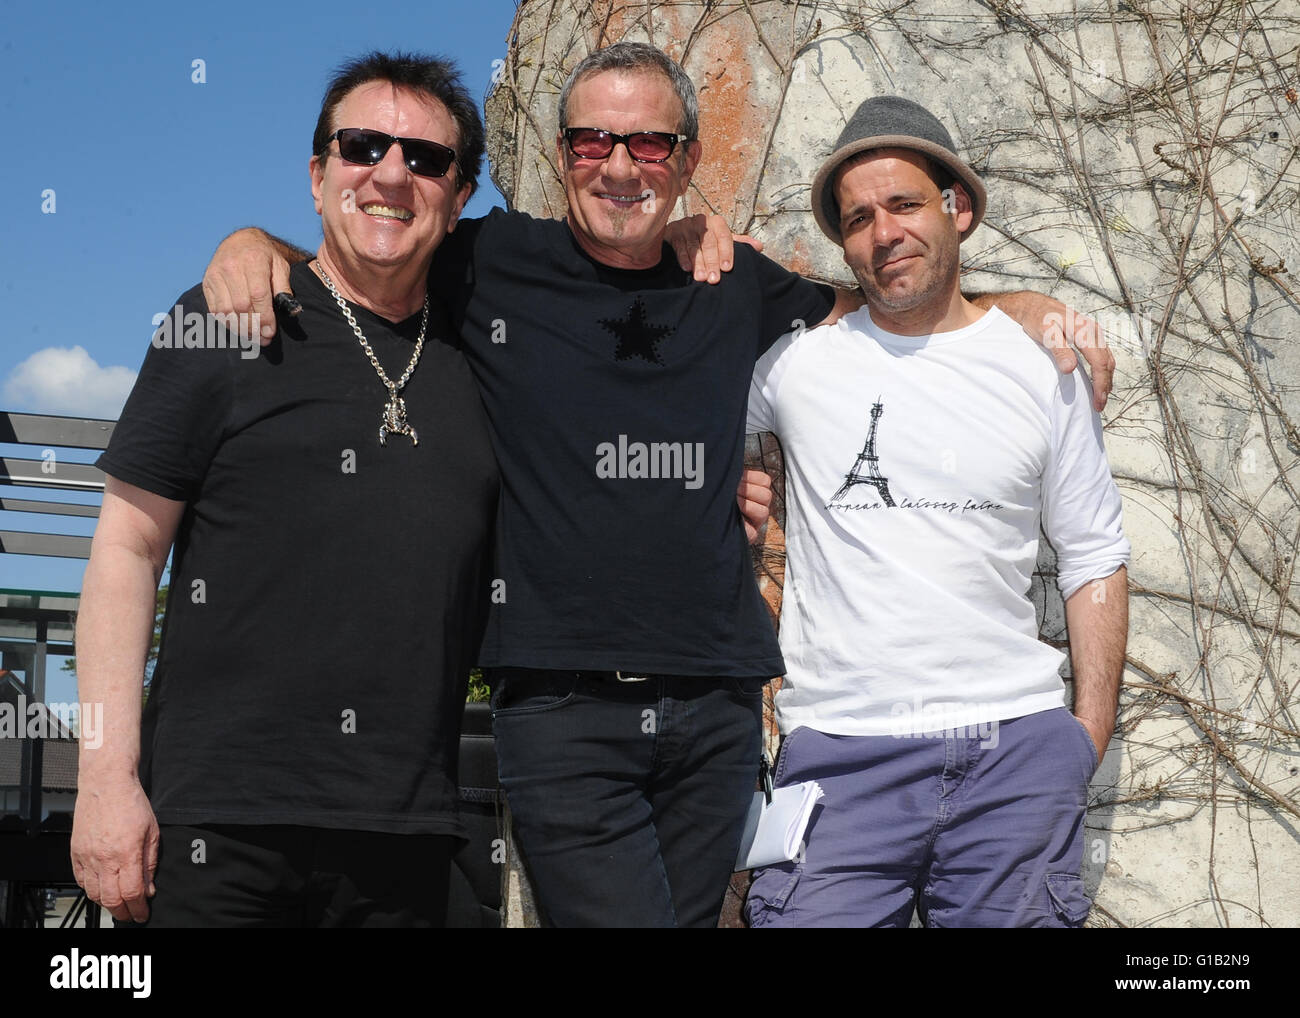 Seeshaupt, Germany. 7th May, 2016. dpa EXCLUSIVE - Tico Torres (L-R), drummer of the group Bon Jovi, Herman Rarebell, former drummer of the Scorpions and music video and film director Maik Marzuk smile as they pose in front of the Berlin Wall during a video shoot for Torres' fashion collection 'Rock Star Baby' in Seeshaupt, Germany, 7 May 2016. Hermann and Torres havbe known each other since the 1980s when Bon Jovi performed as the supporting act of the German music group Scorpions when they went on a four-months concert tour. Photo: Ursula Dueren/dpa/Alamy Live News Stock Photo